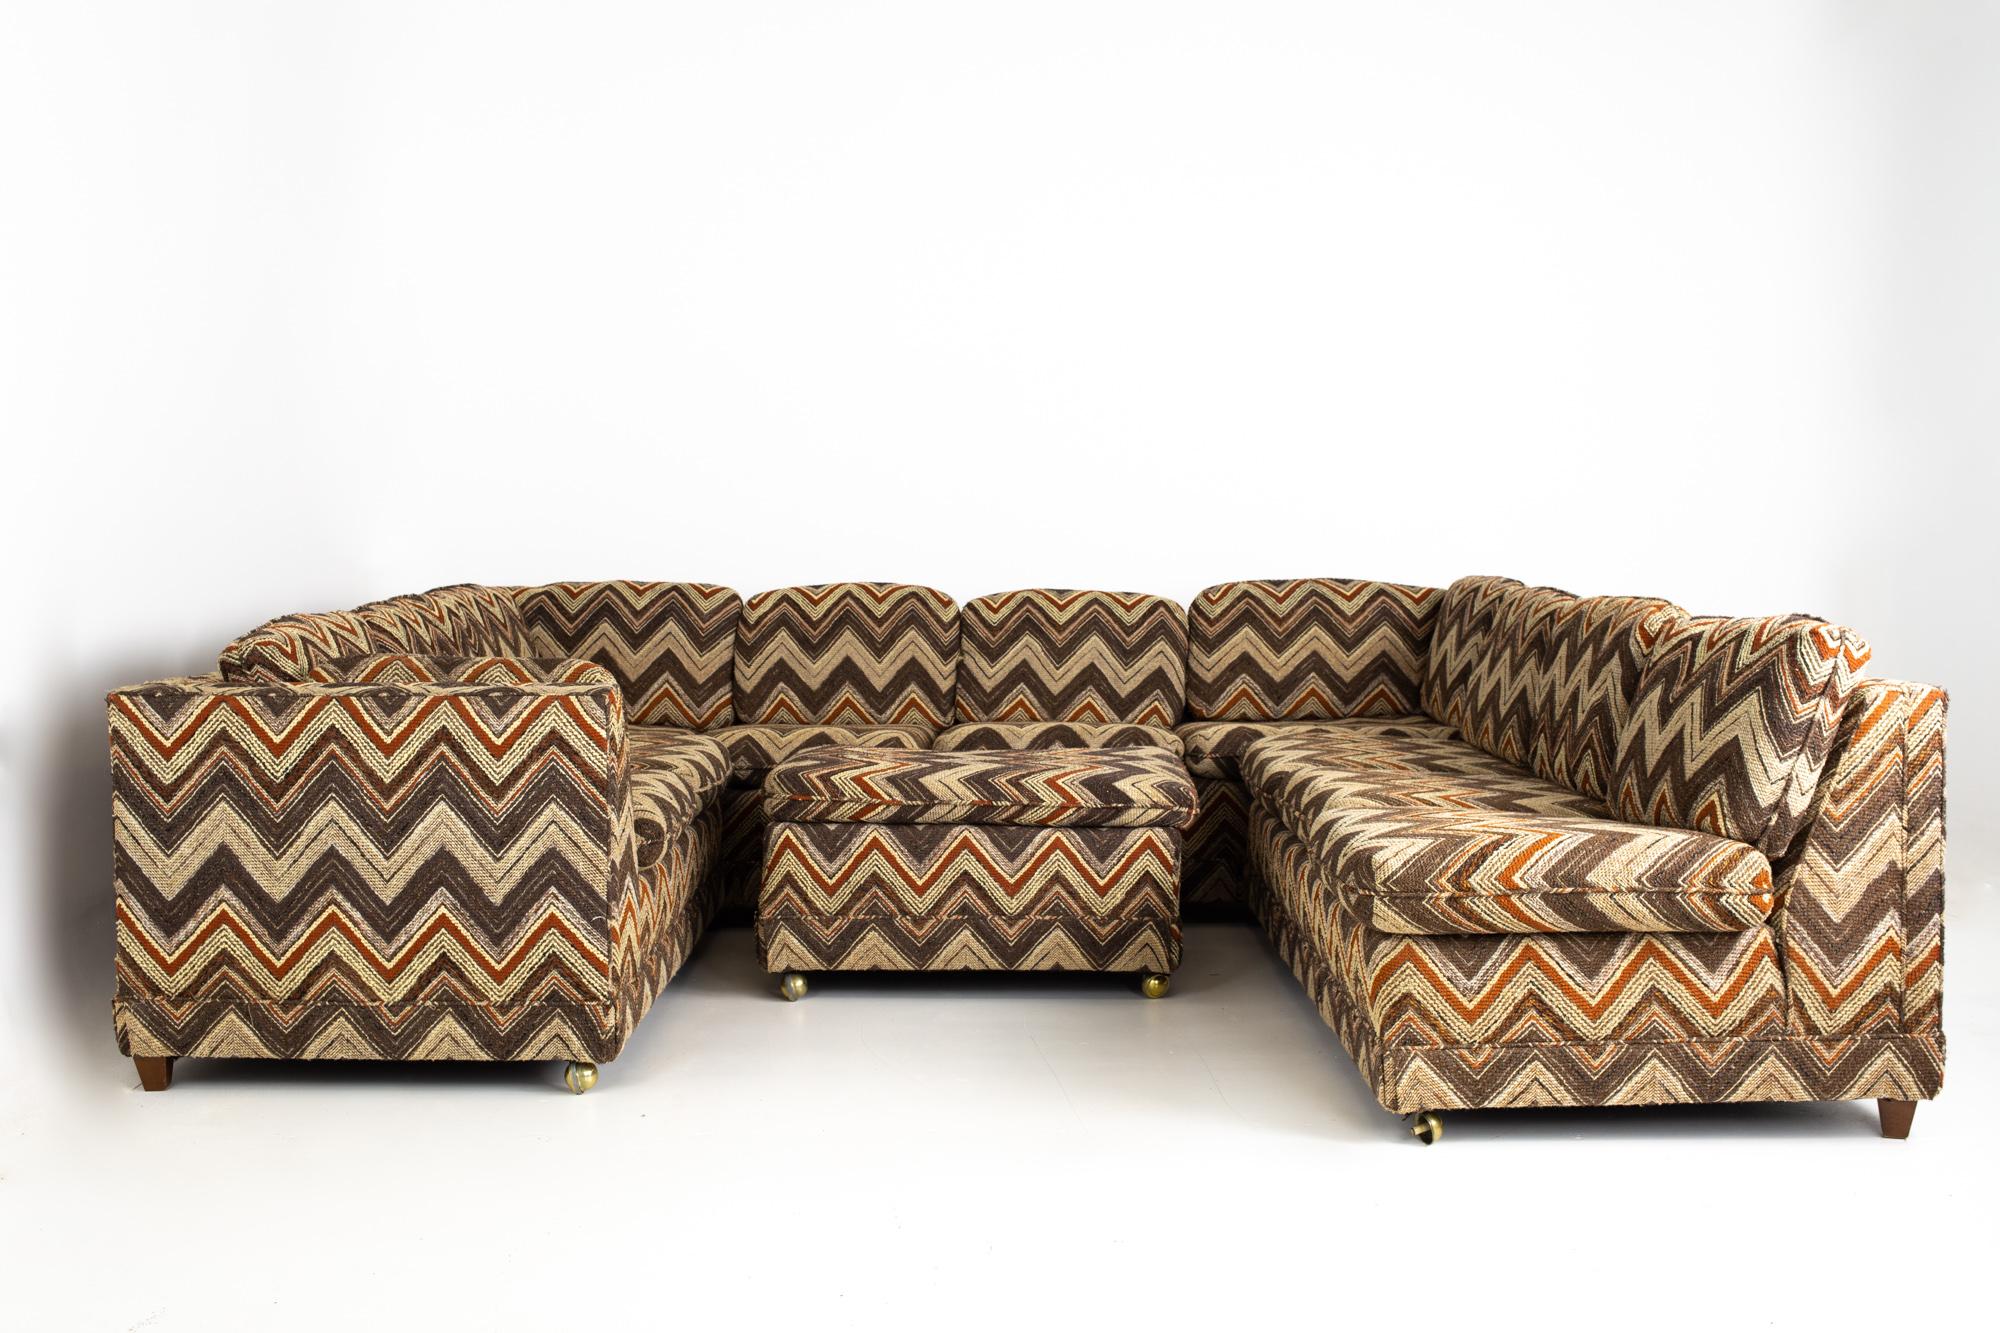 Jack Lenor Larsen style mid century Chevron sectional sofa
This sectional sofa measures: 245.5 wide x 34 deep x 27.5 inches high with a seat height of 18.5 and arm height of 27.5 inches

All pieces of furniture can be had in what we call restored